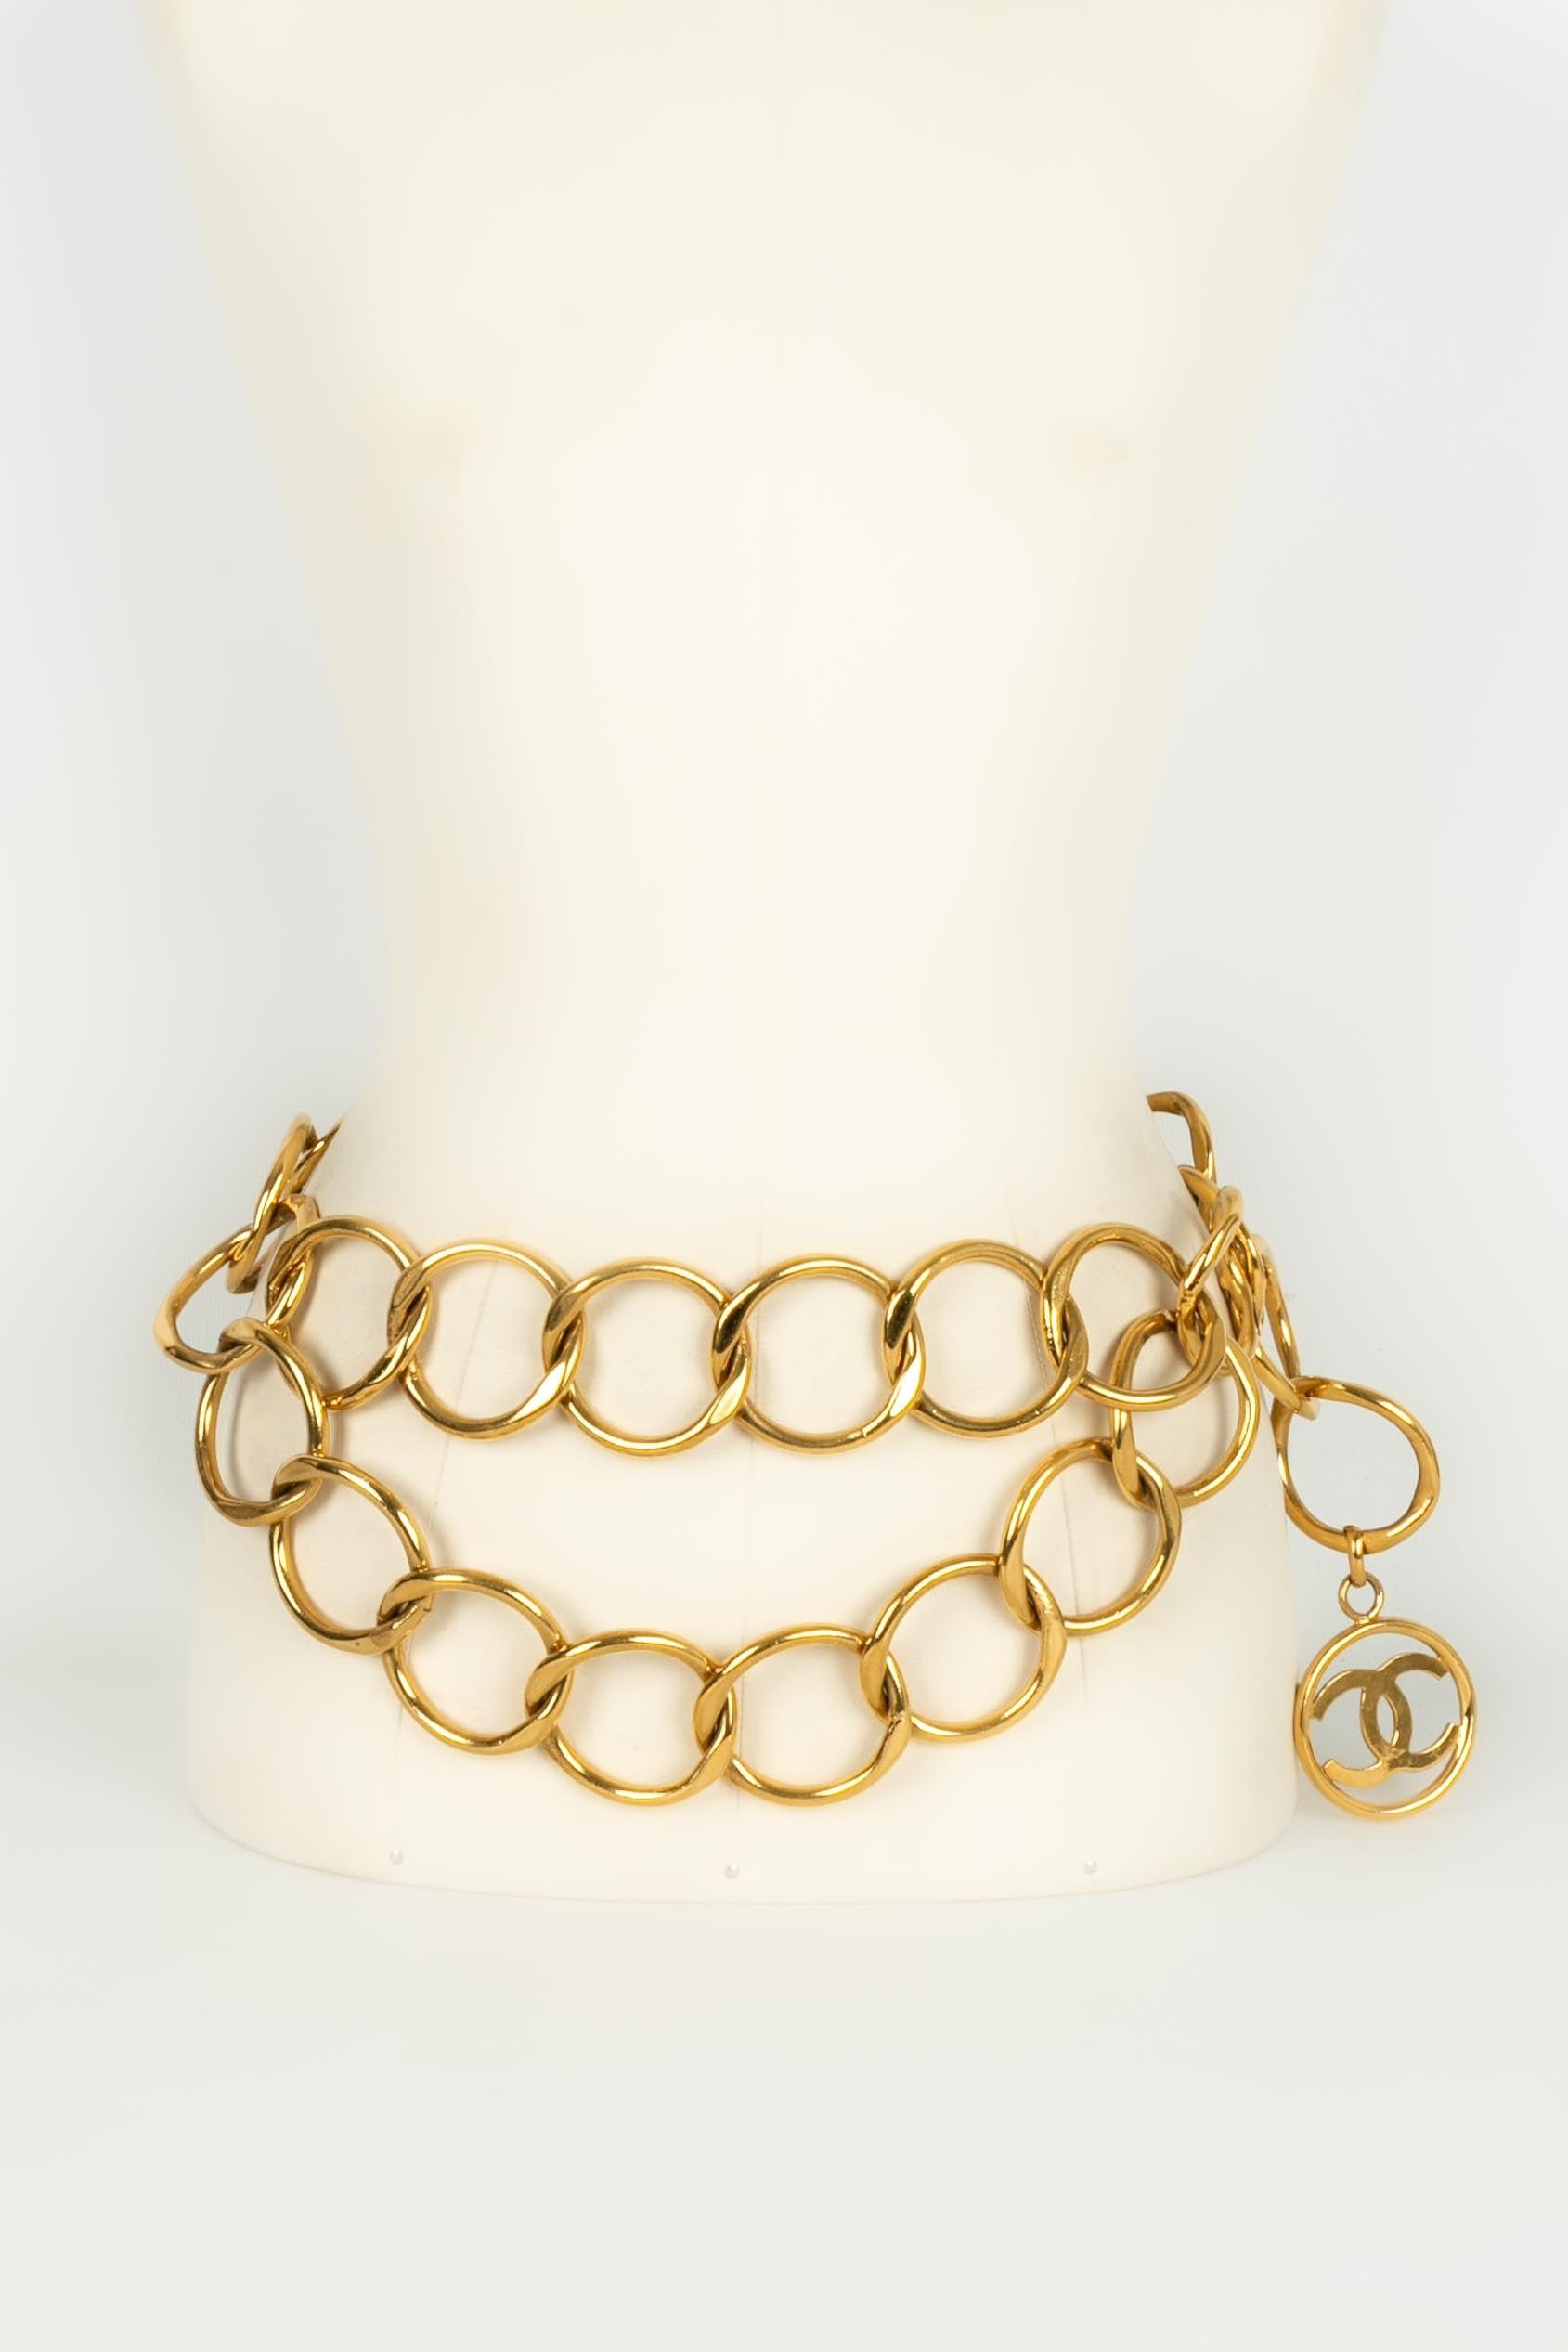 Chanel Belt Composed of Big Links in Gold-Plated Metal, 1990s For Sale 5